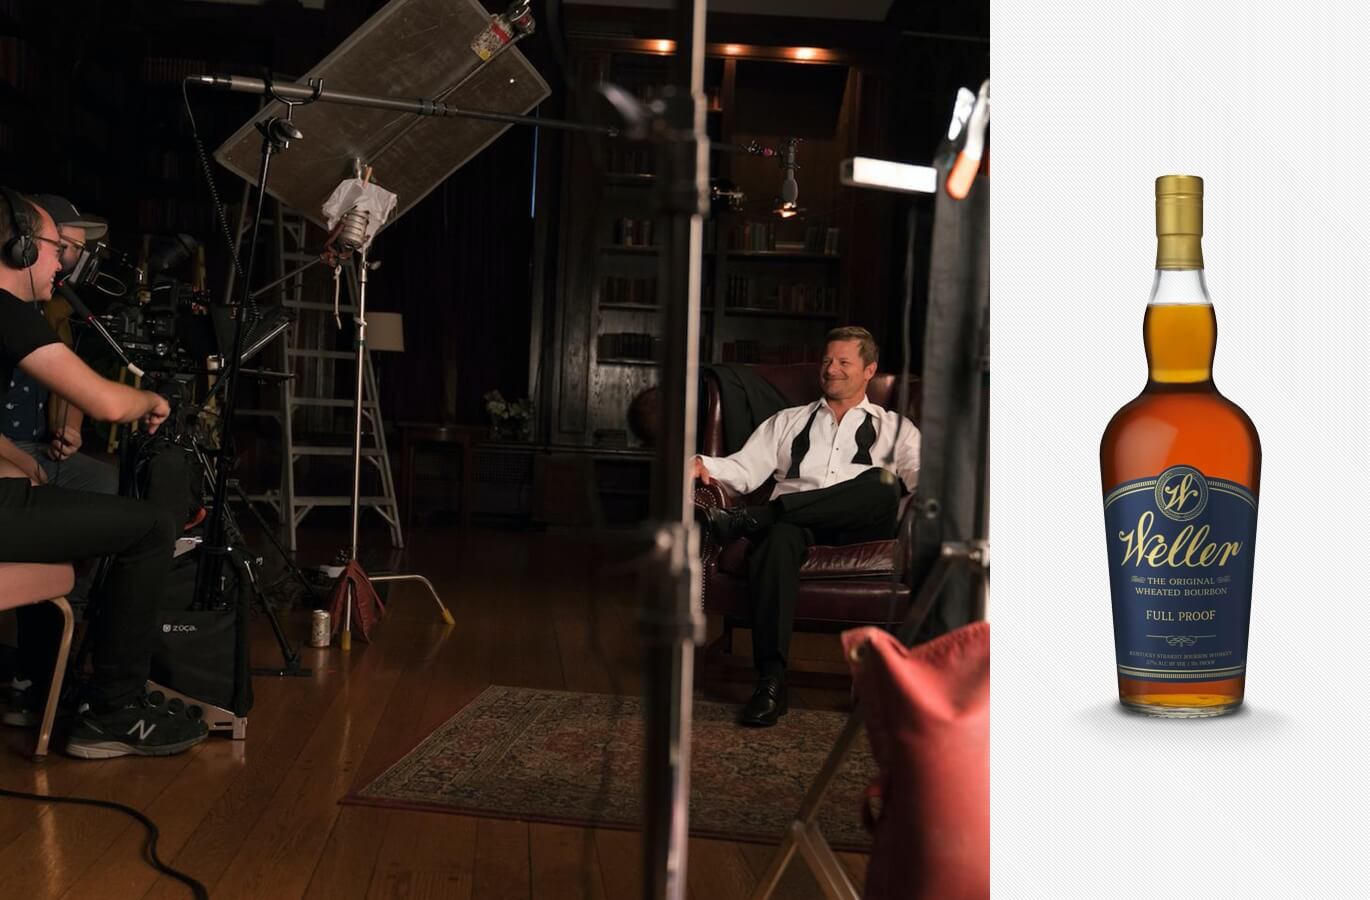 Neat: The Story of Bourbon movie and Weller Full Proof bourbon